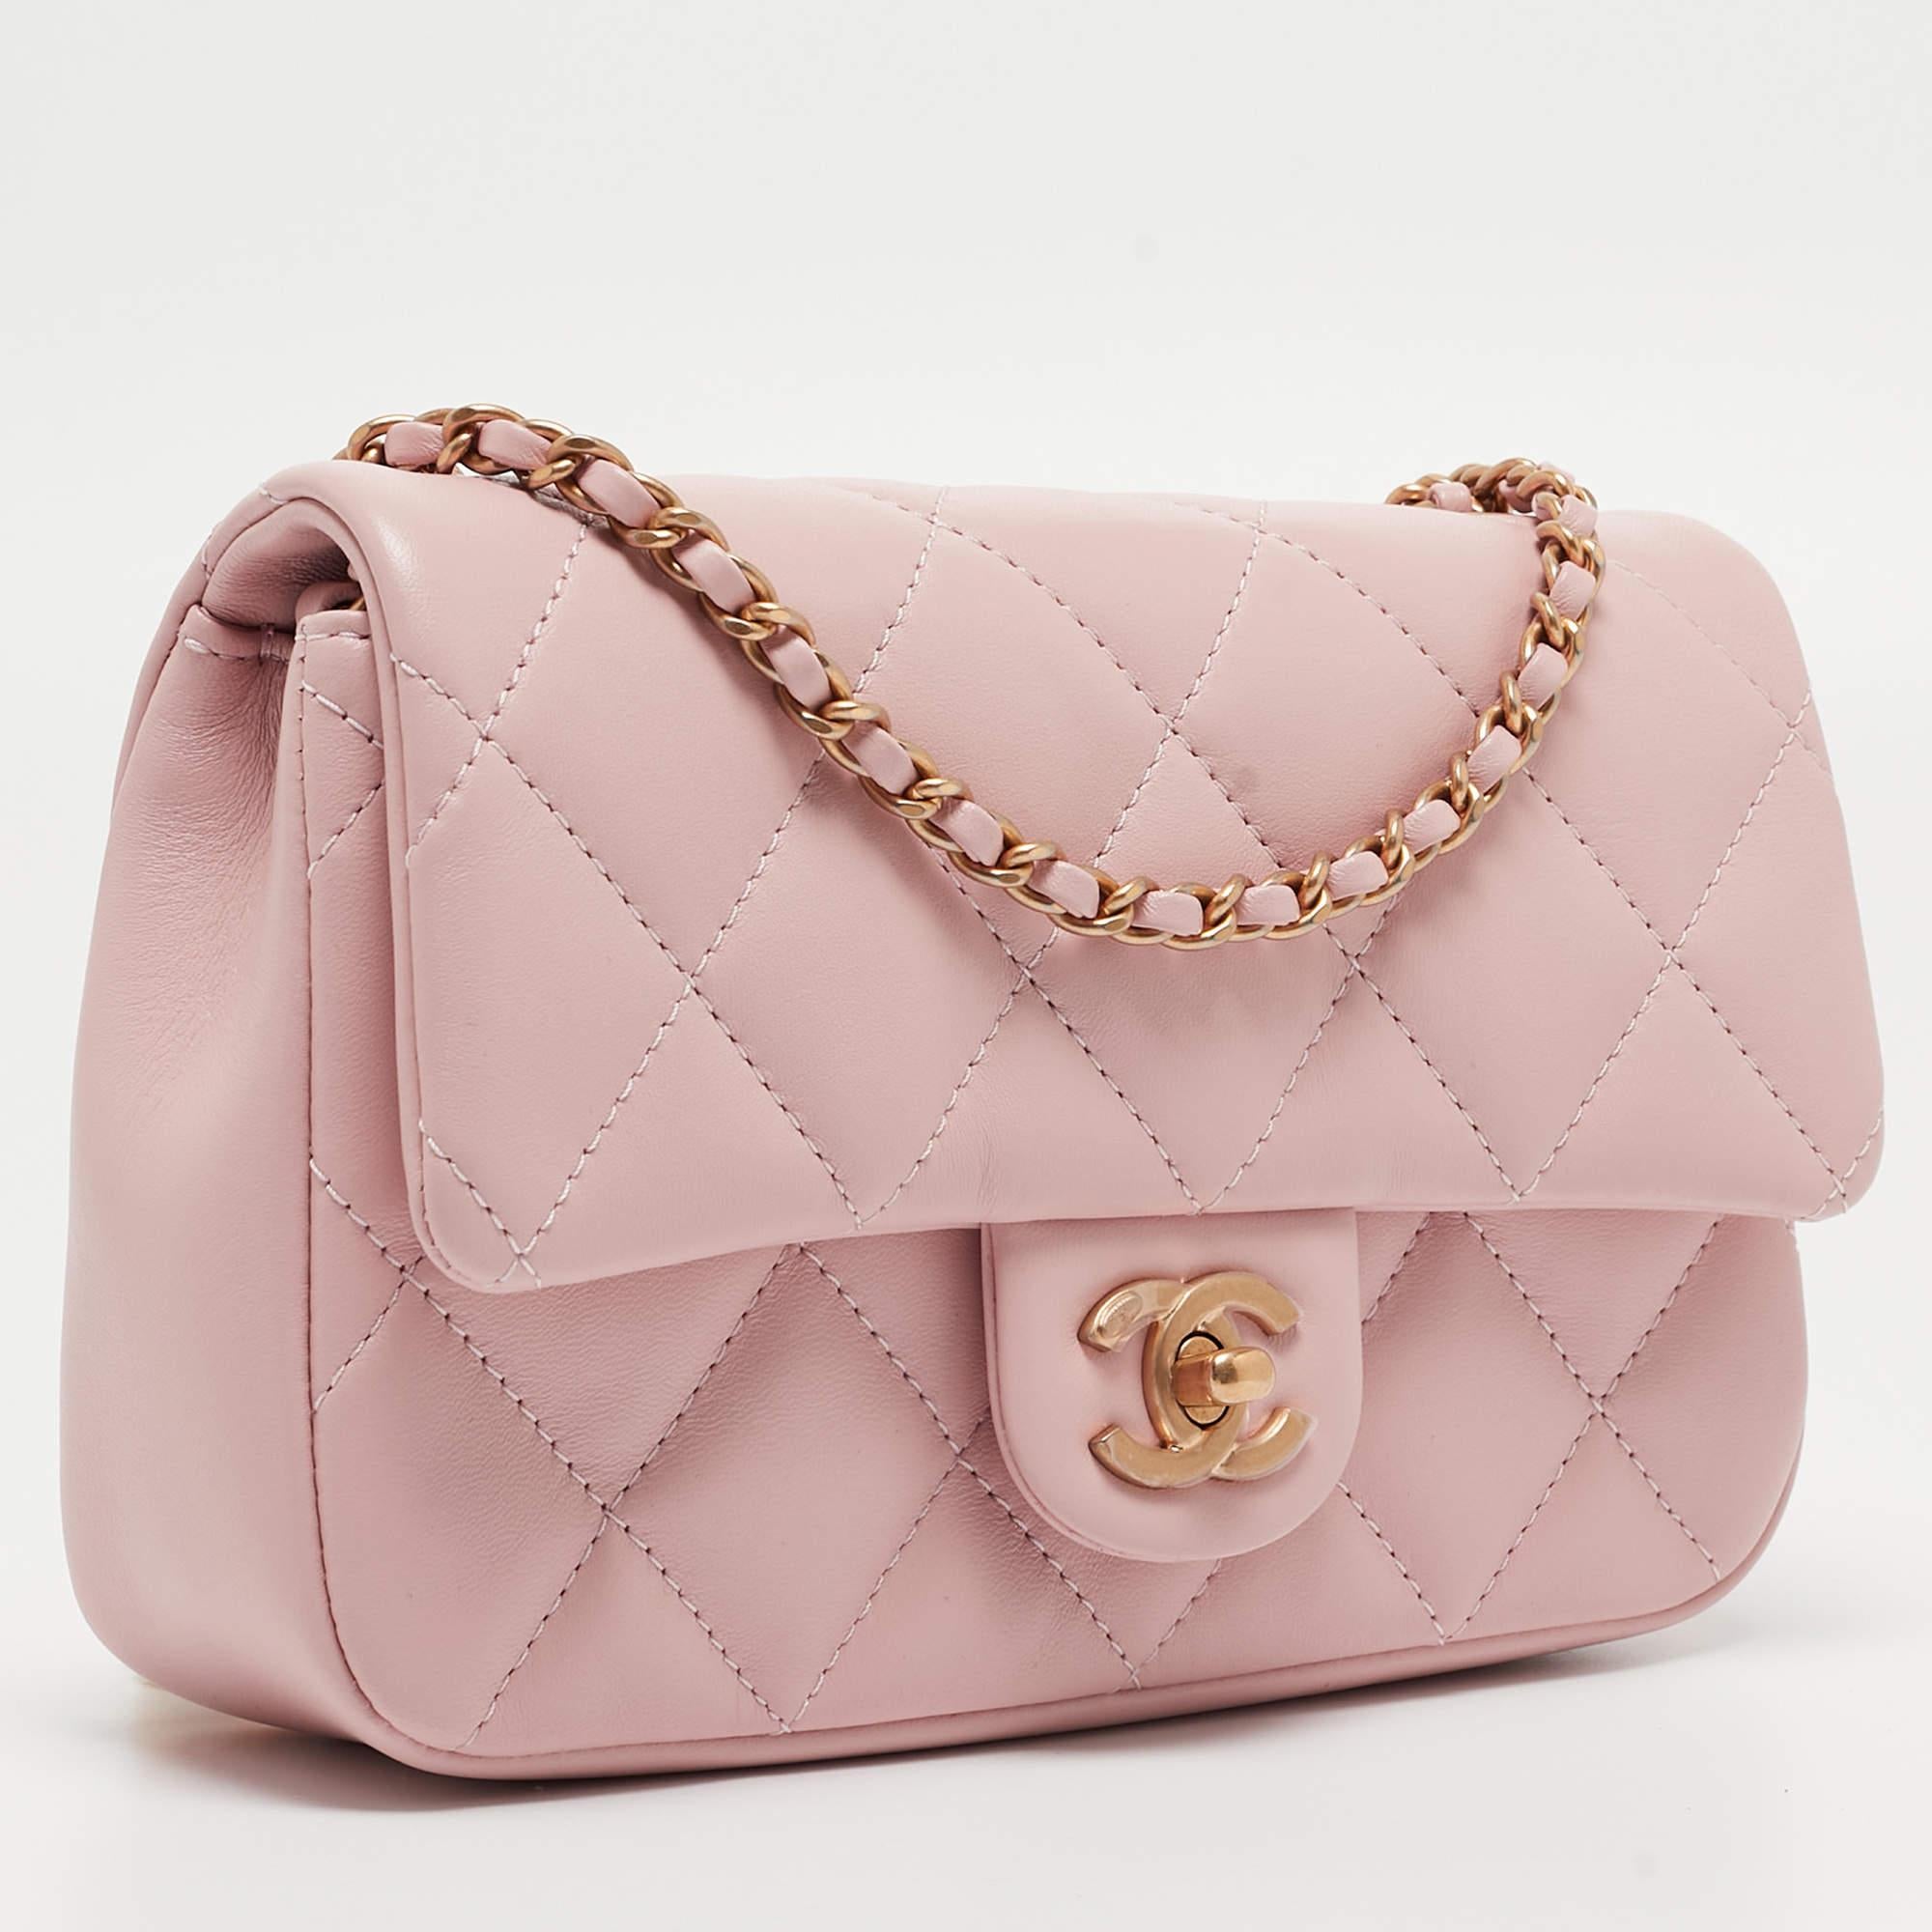 Chanel Pink Quilted Leather New Mini Heart Charm Classic Flap Bag In Excellent Condition For Sale In Dubai, Al Qouz 2